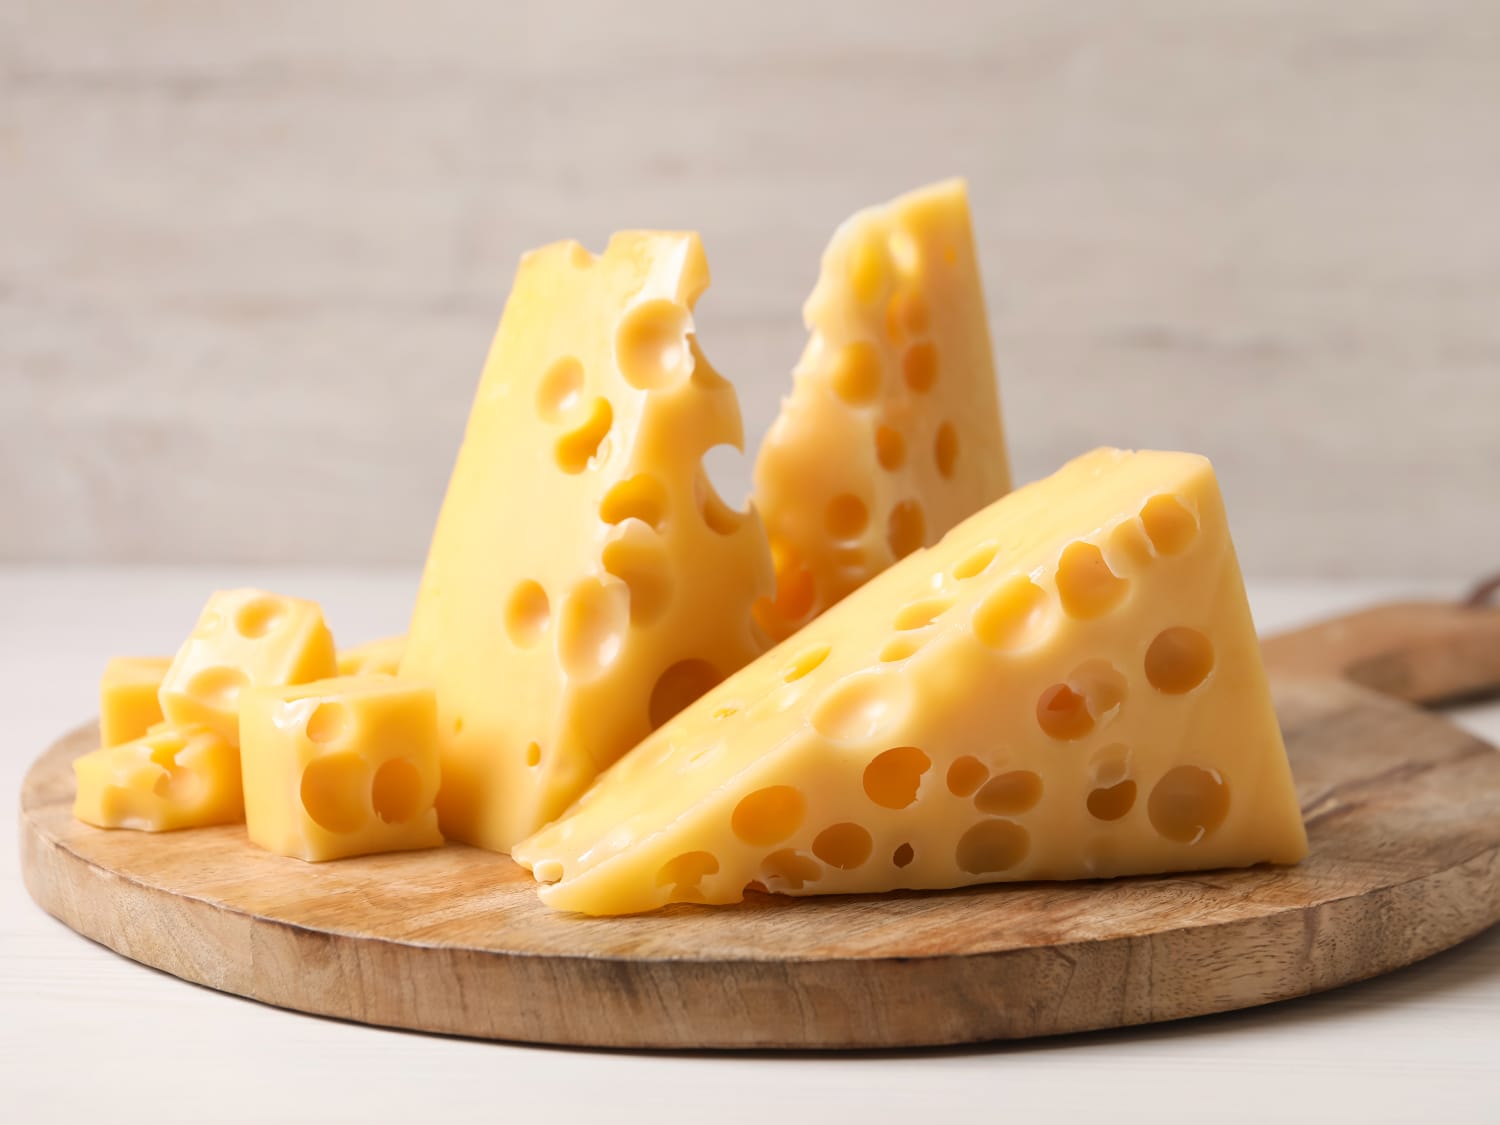 Everyone Is Just Finding Out Why Swiss Cheese Has Holes and People Are Losing It